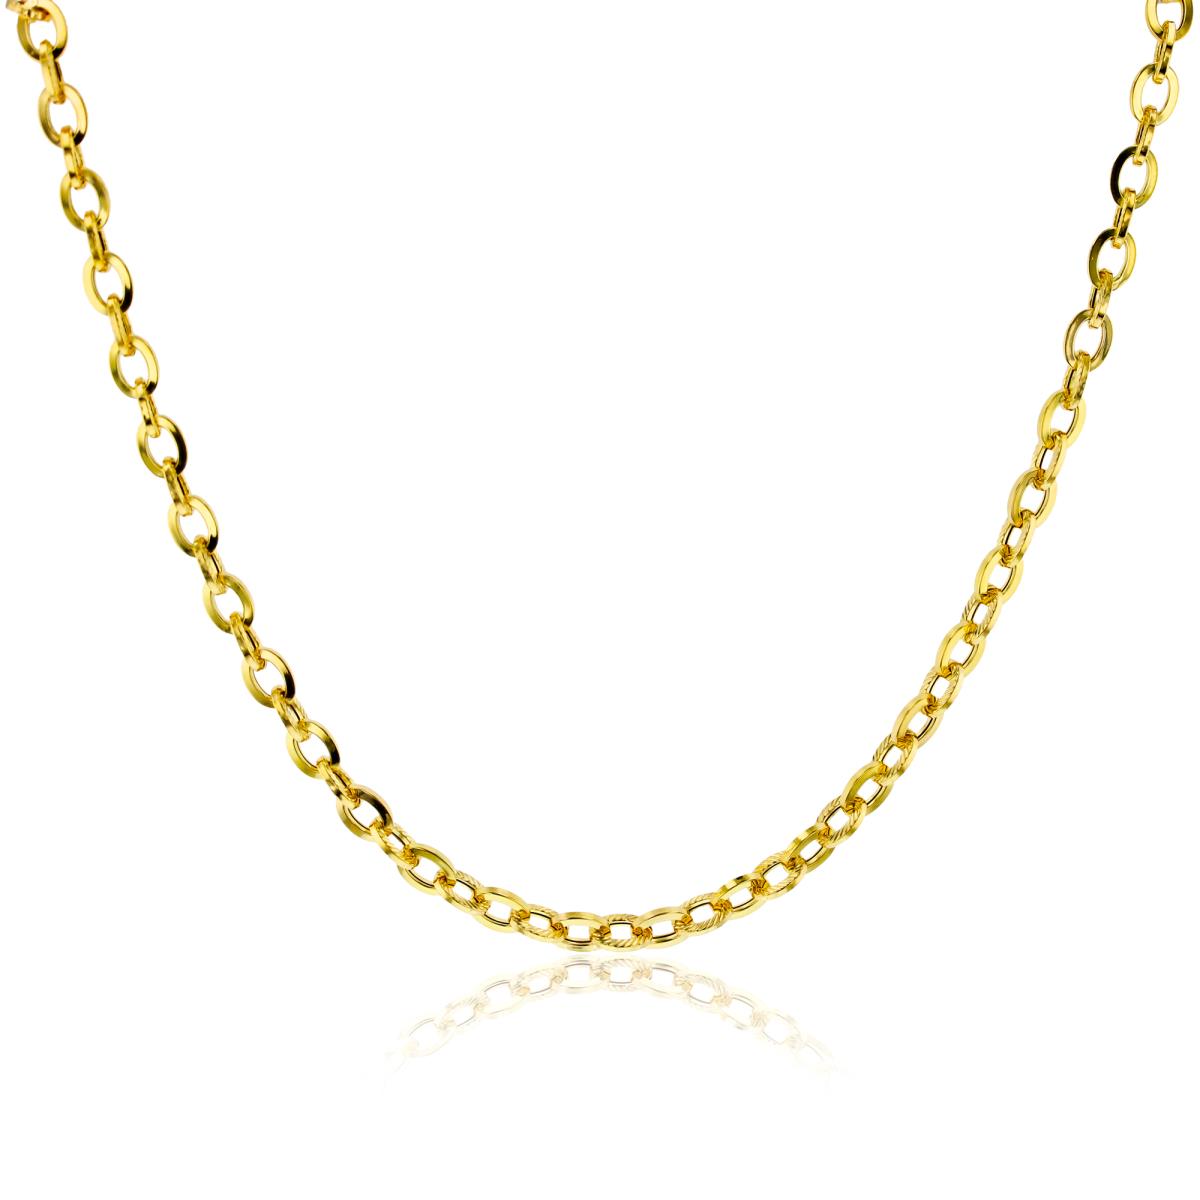 10K Yellow Gold Alternate Polished & Textured Open Oval Linked Italian 18"Necklace